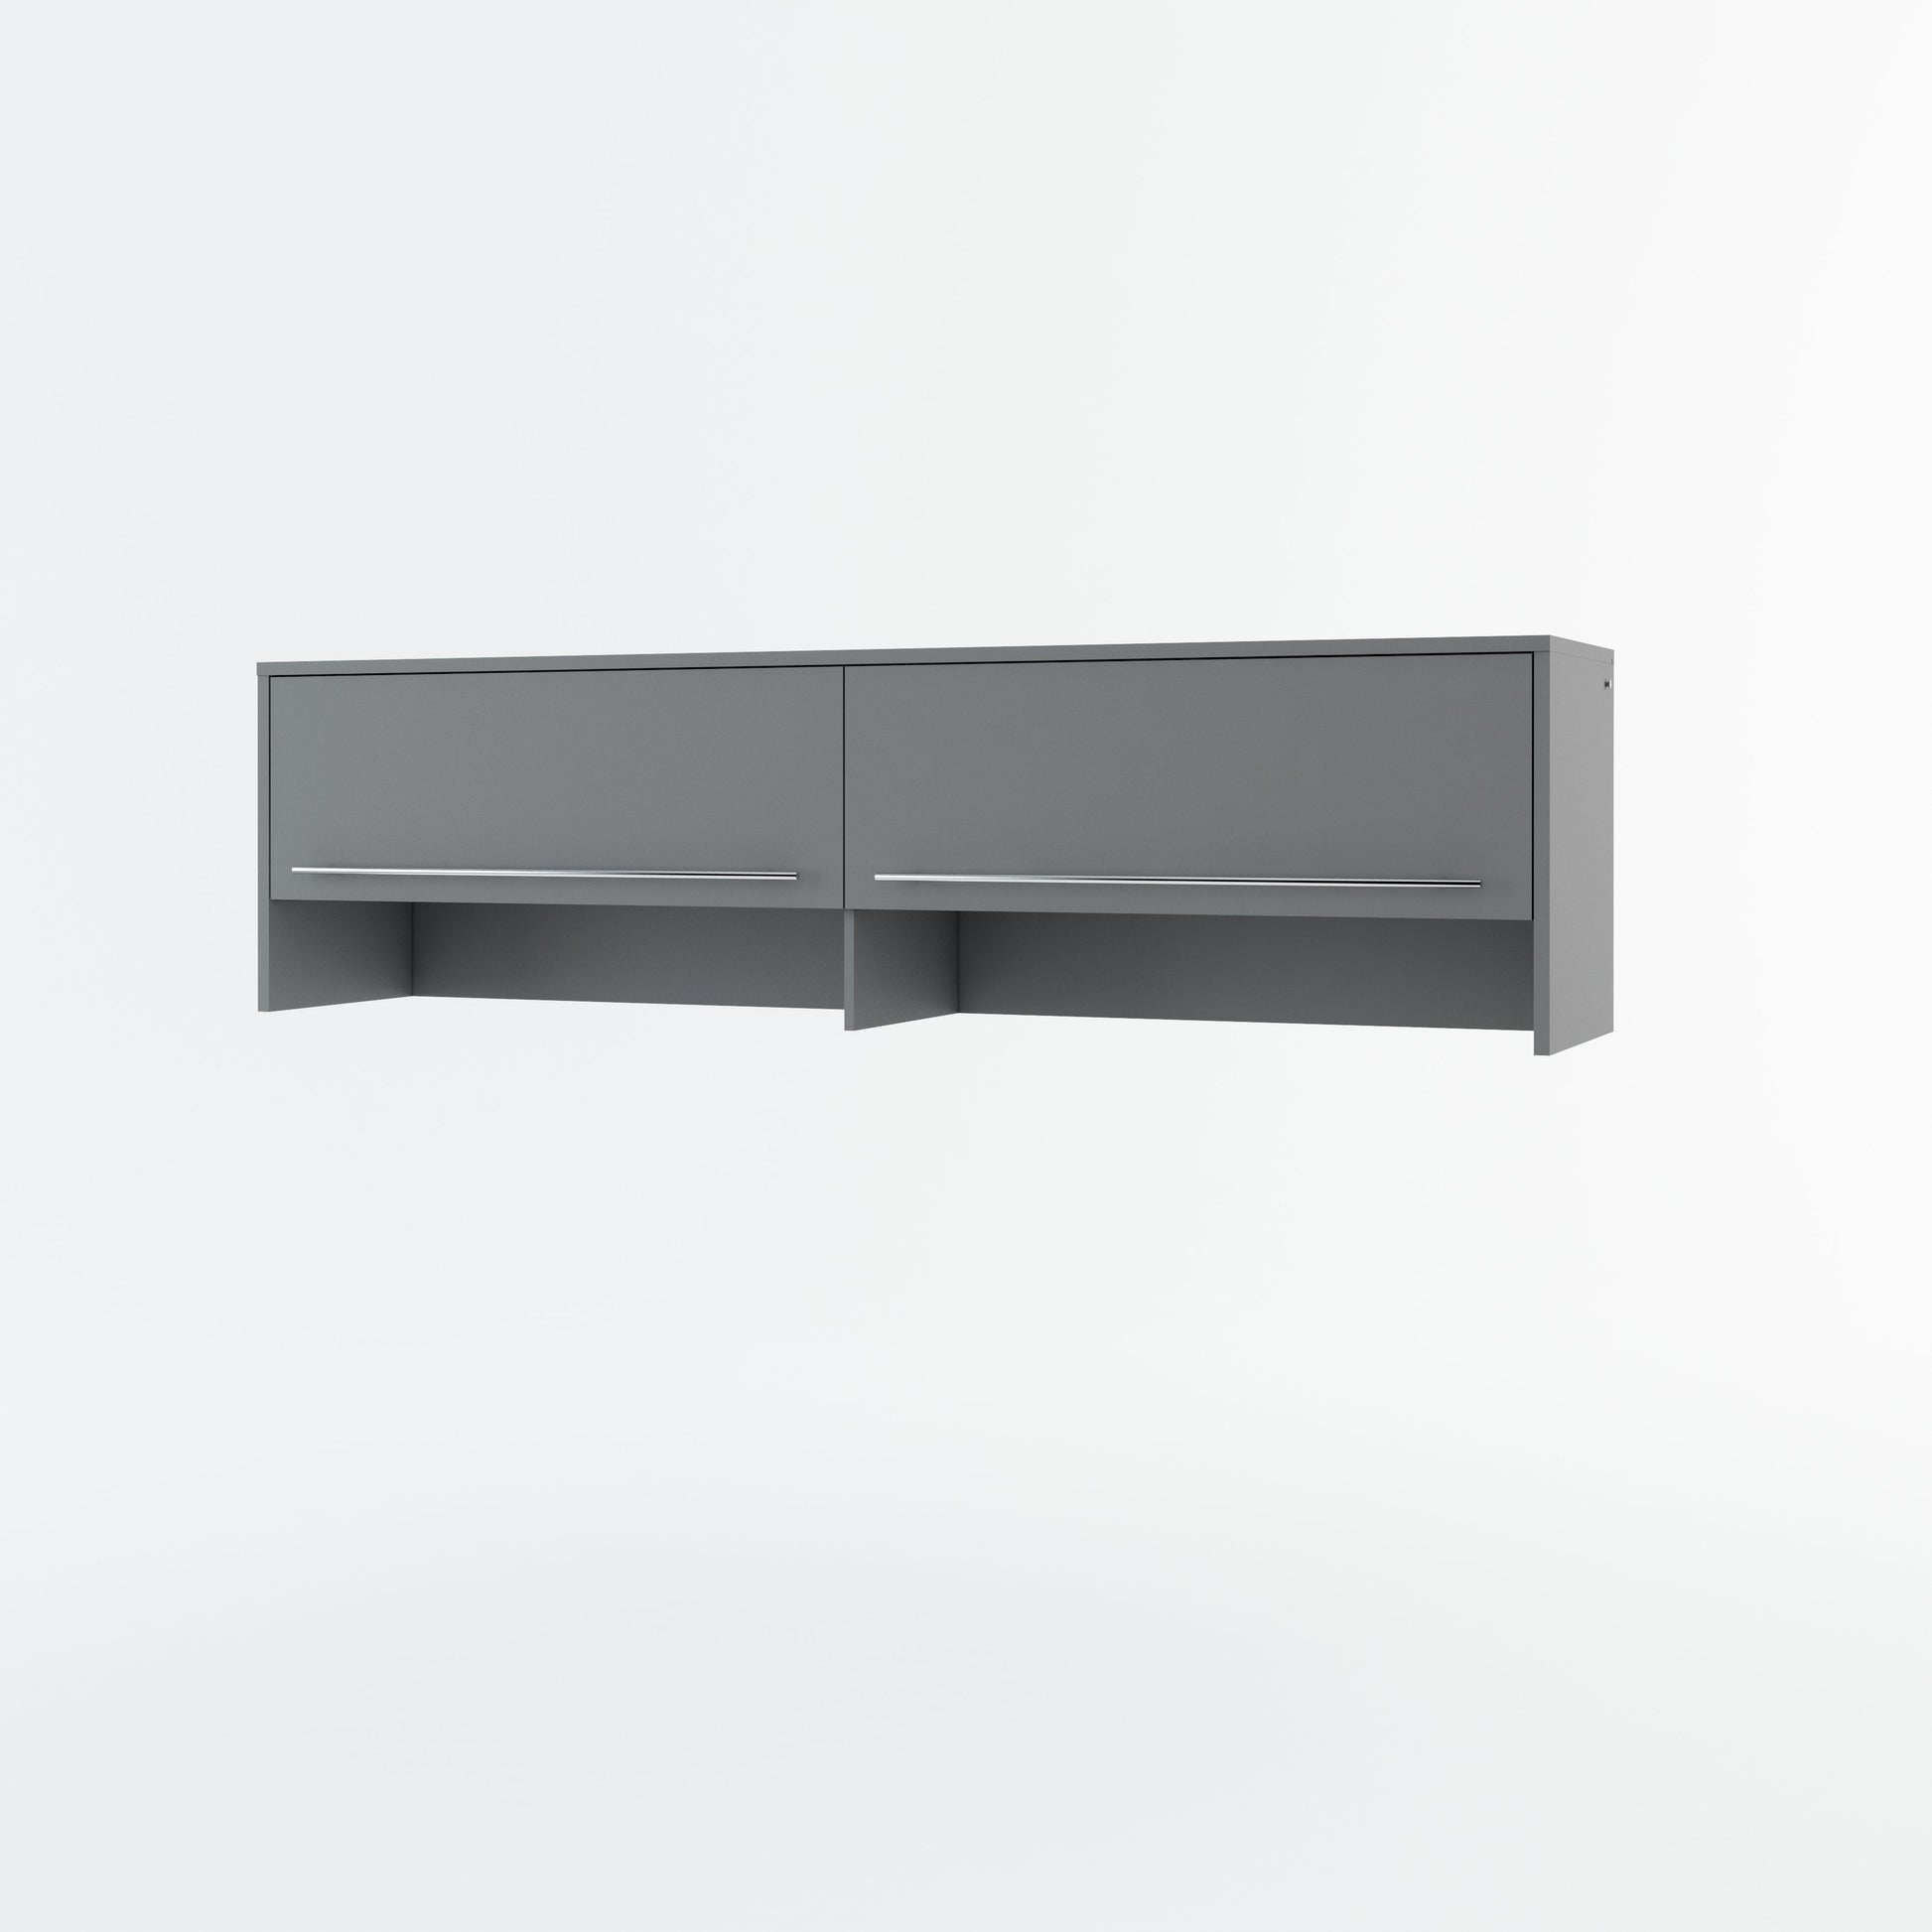 CP-09 Over Bed Unit for Horizontal Wall Bed Concept 140cm Grey Matt Wall Bed with Storage Unit 